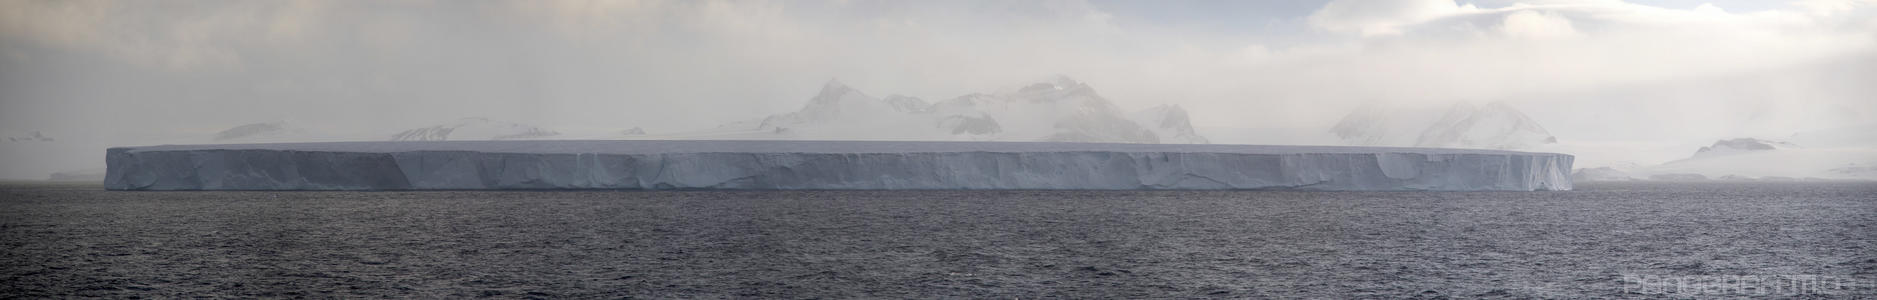 A Small Frozen Village Floats By - At the dimensions of a small village, this iceberg is only showing 10% of its size above water